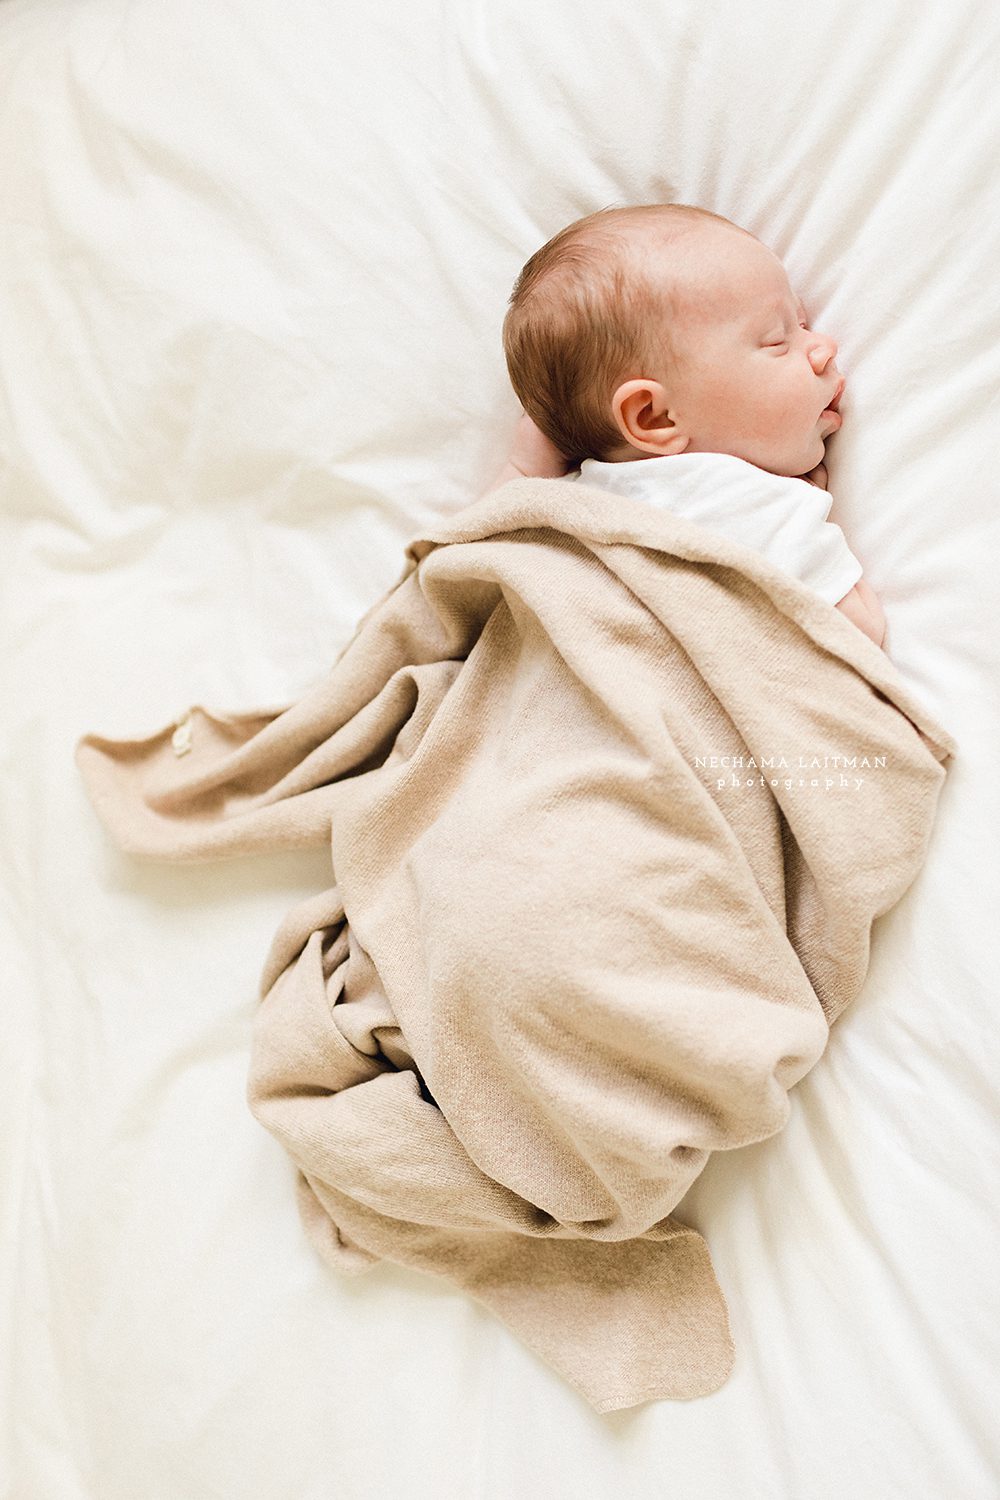 newborn photographer in the GTA specializing in lifestyle at home photography